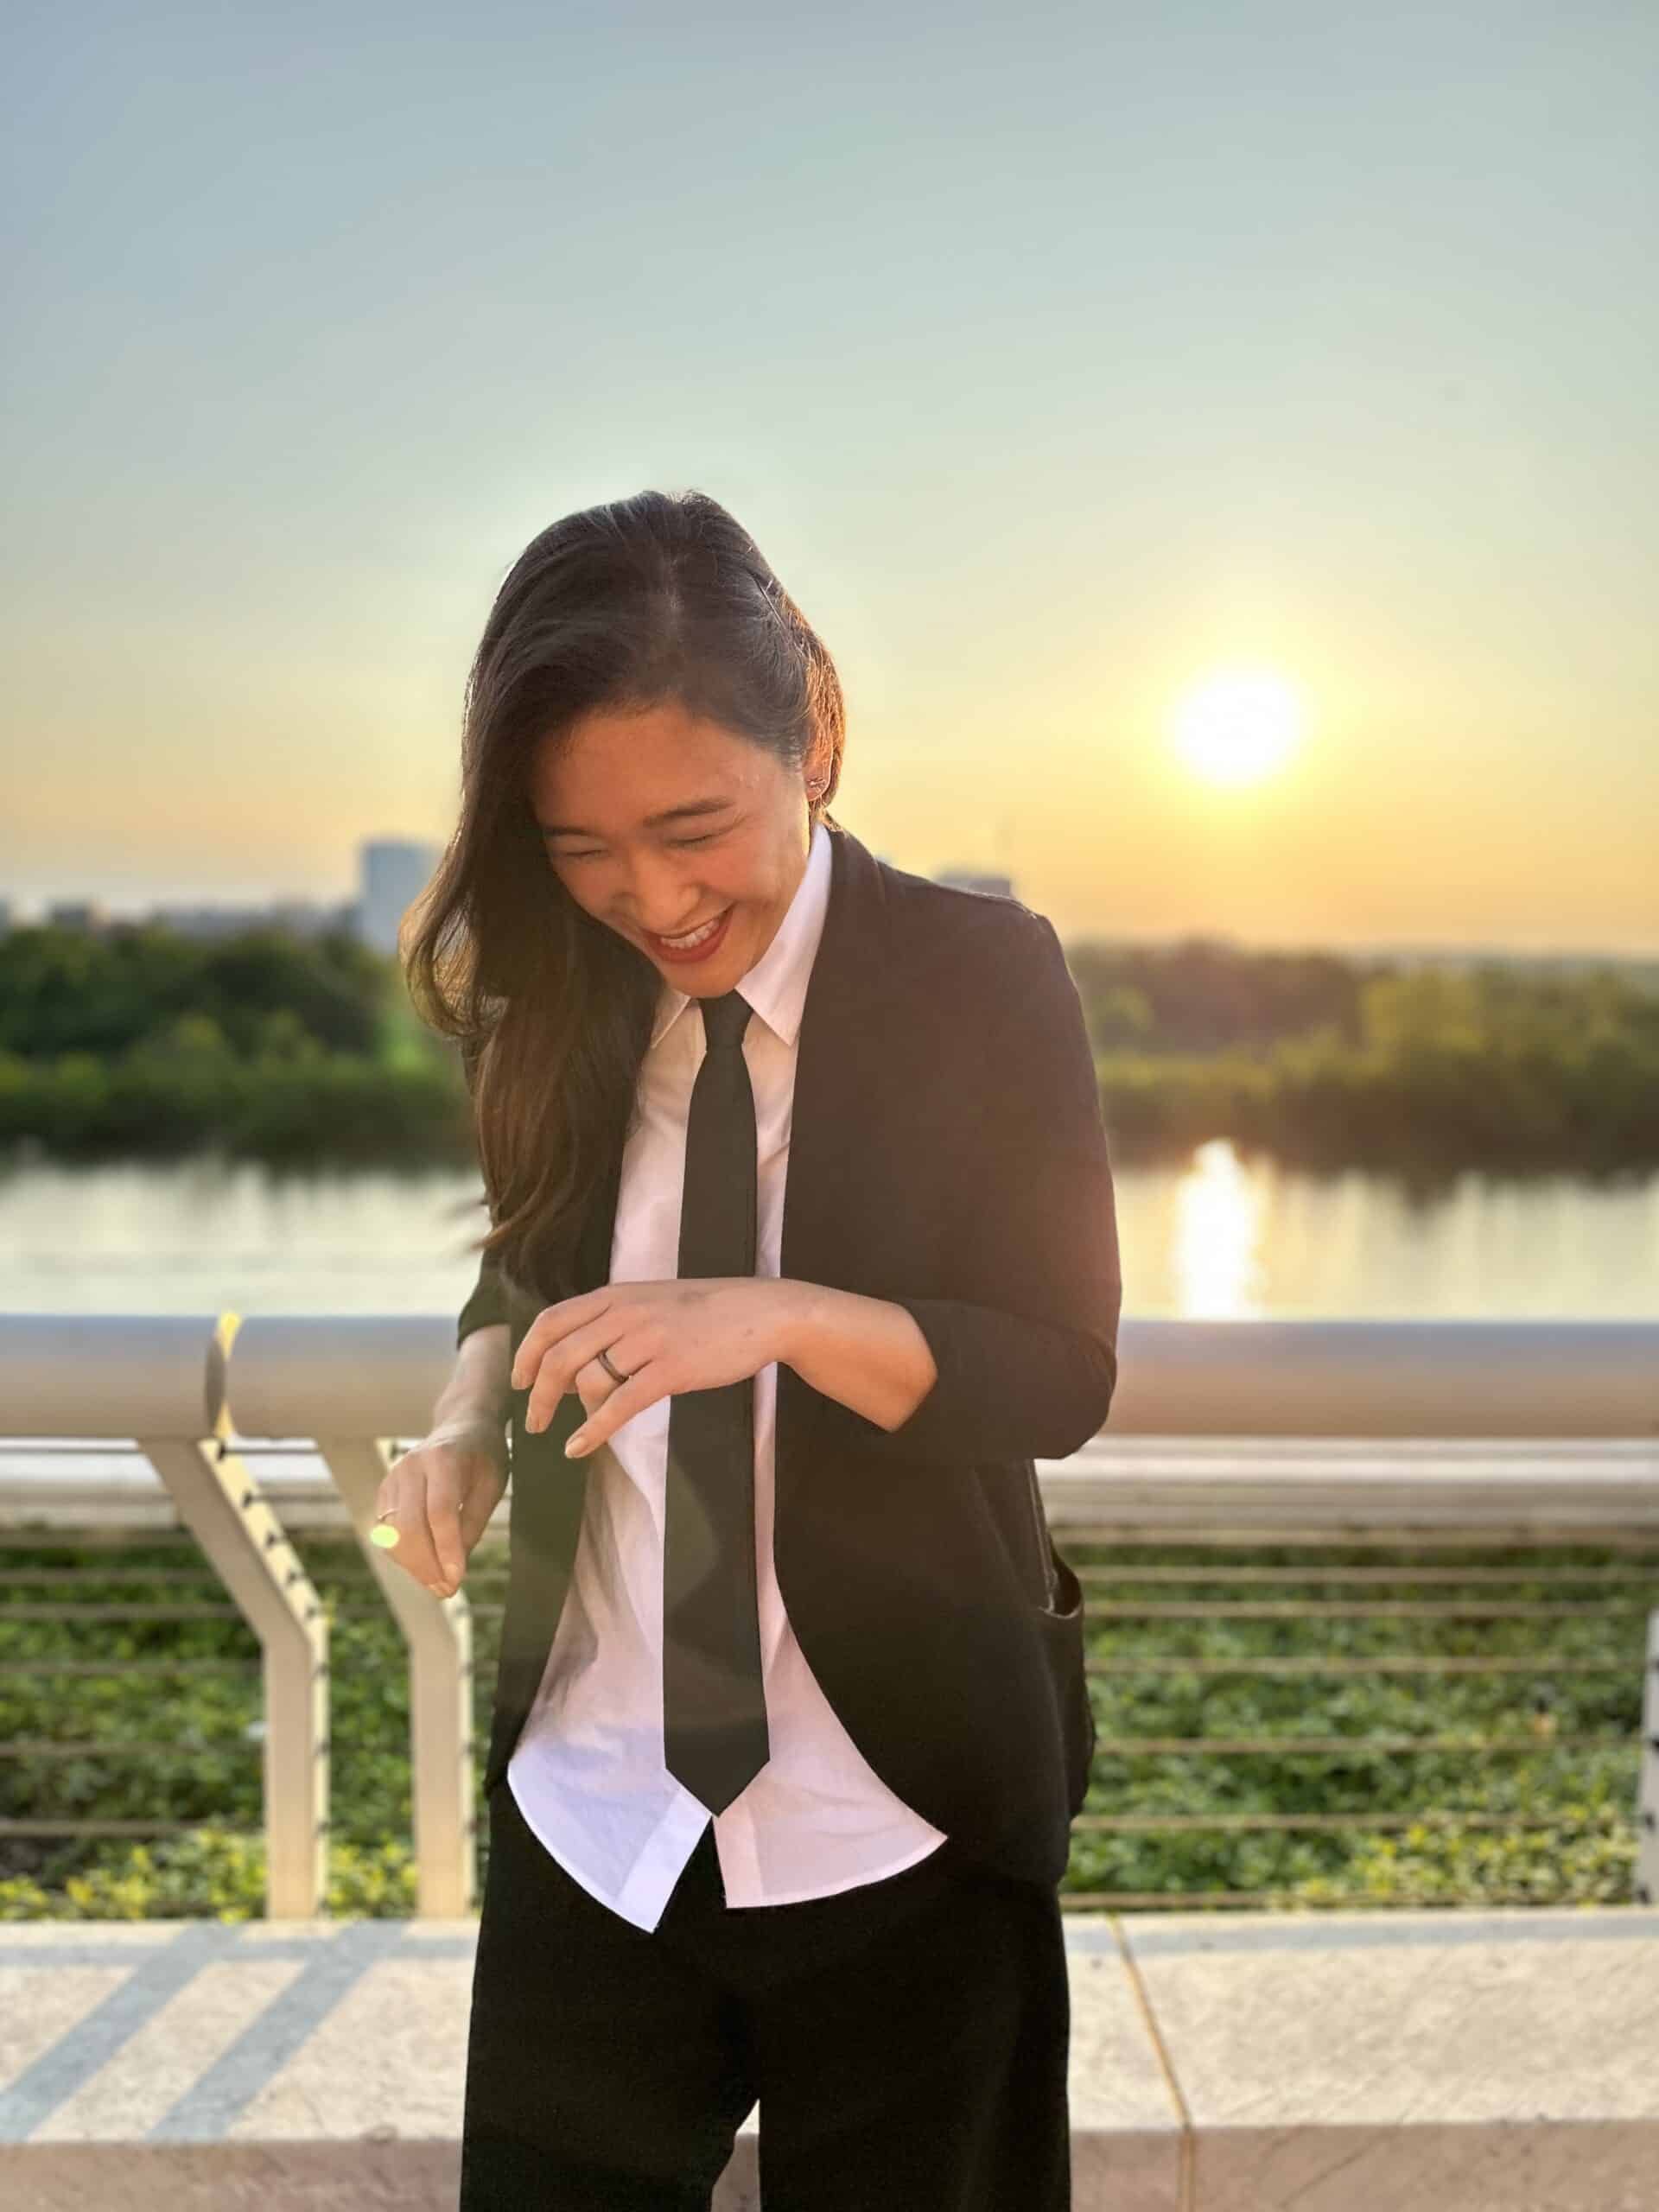 Liz in a suit and tie next to the river at sunset. 